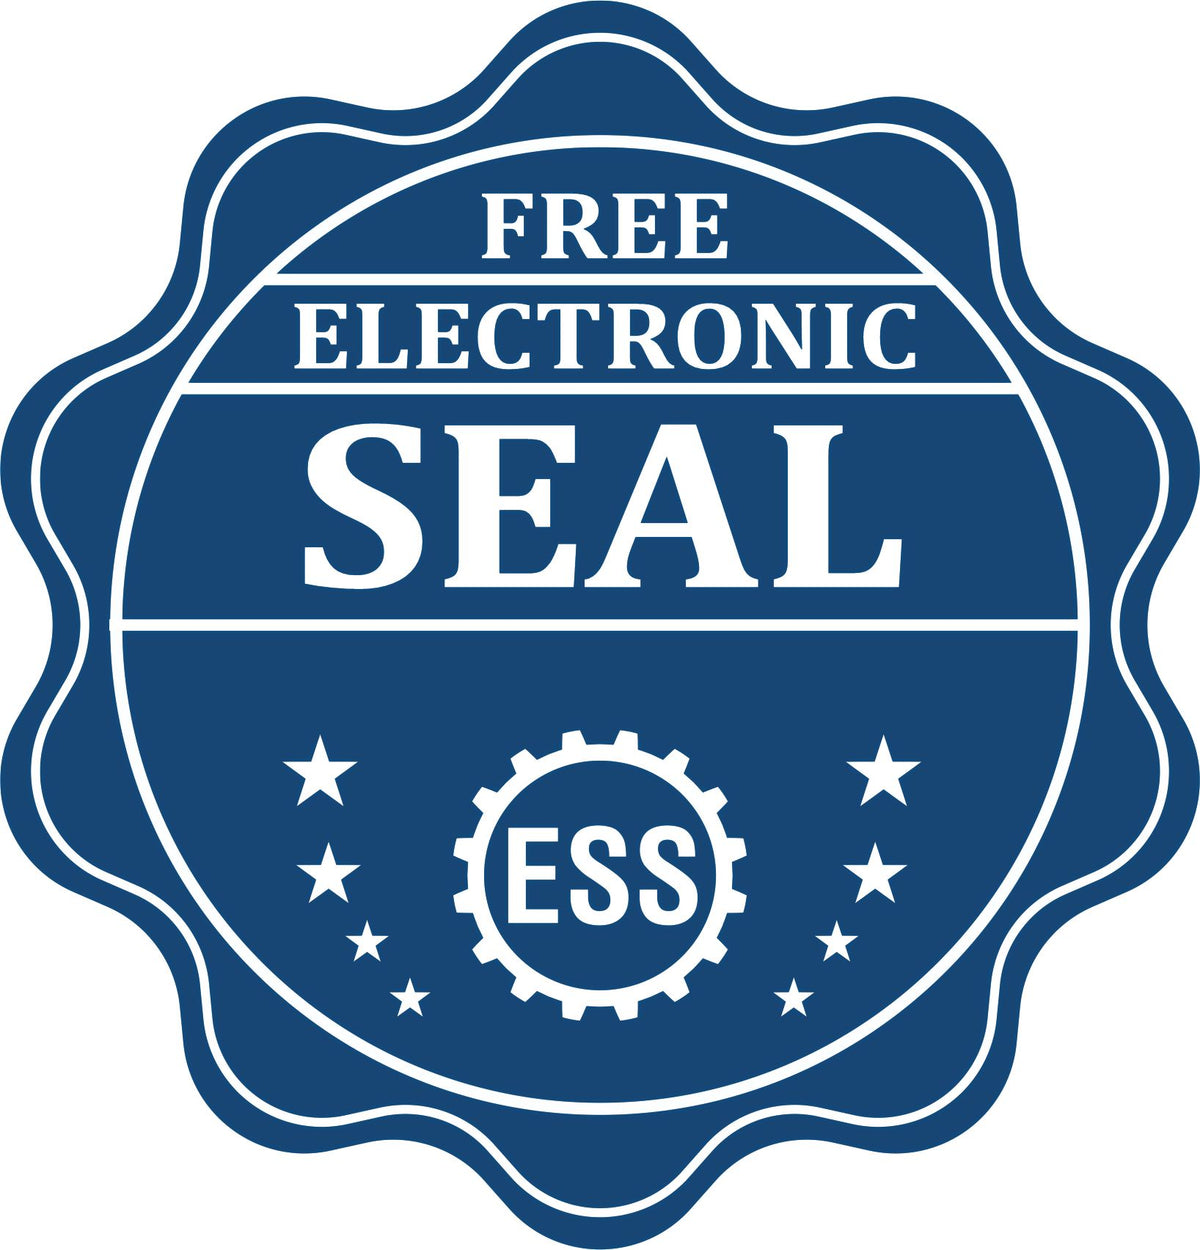 A badge showing a free electronic seal for the Heavy Duty Cast Iron Louisiana Engineer Seal Embosser with stars and the ESS gear on the emblem.